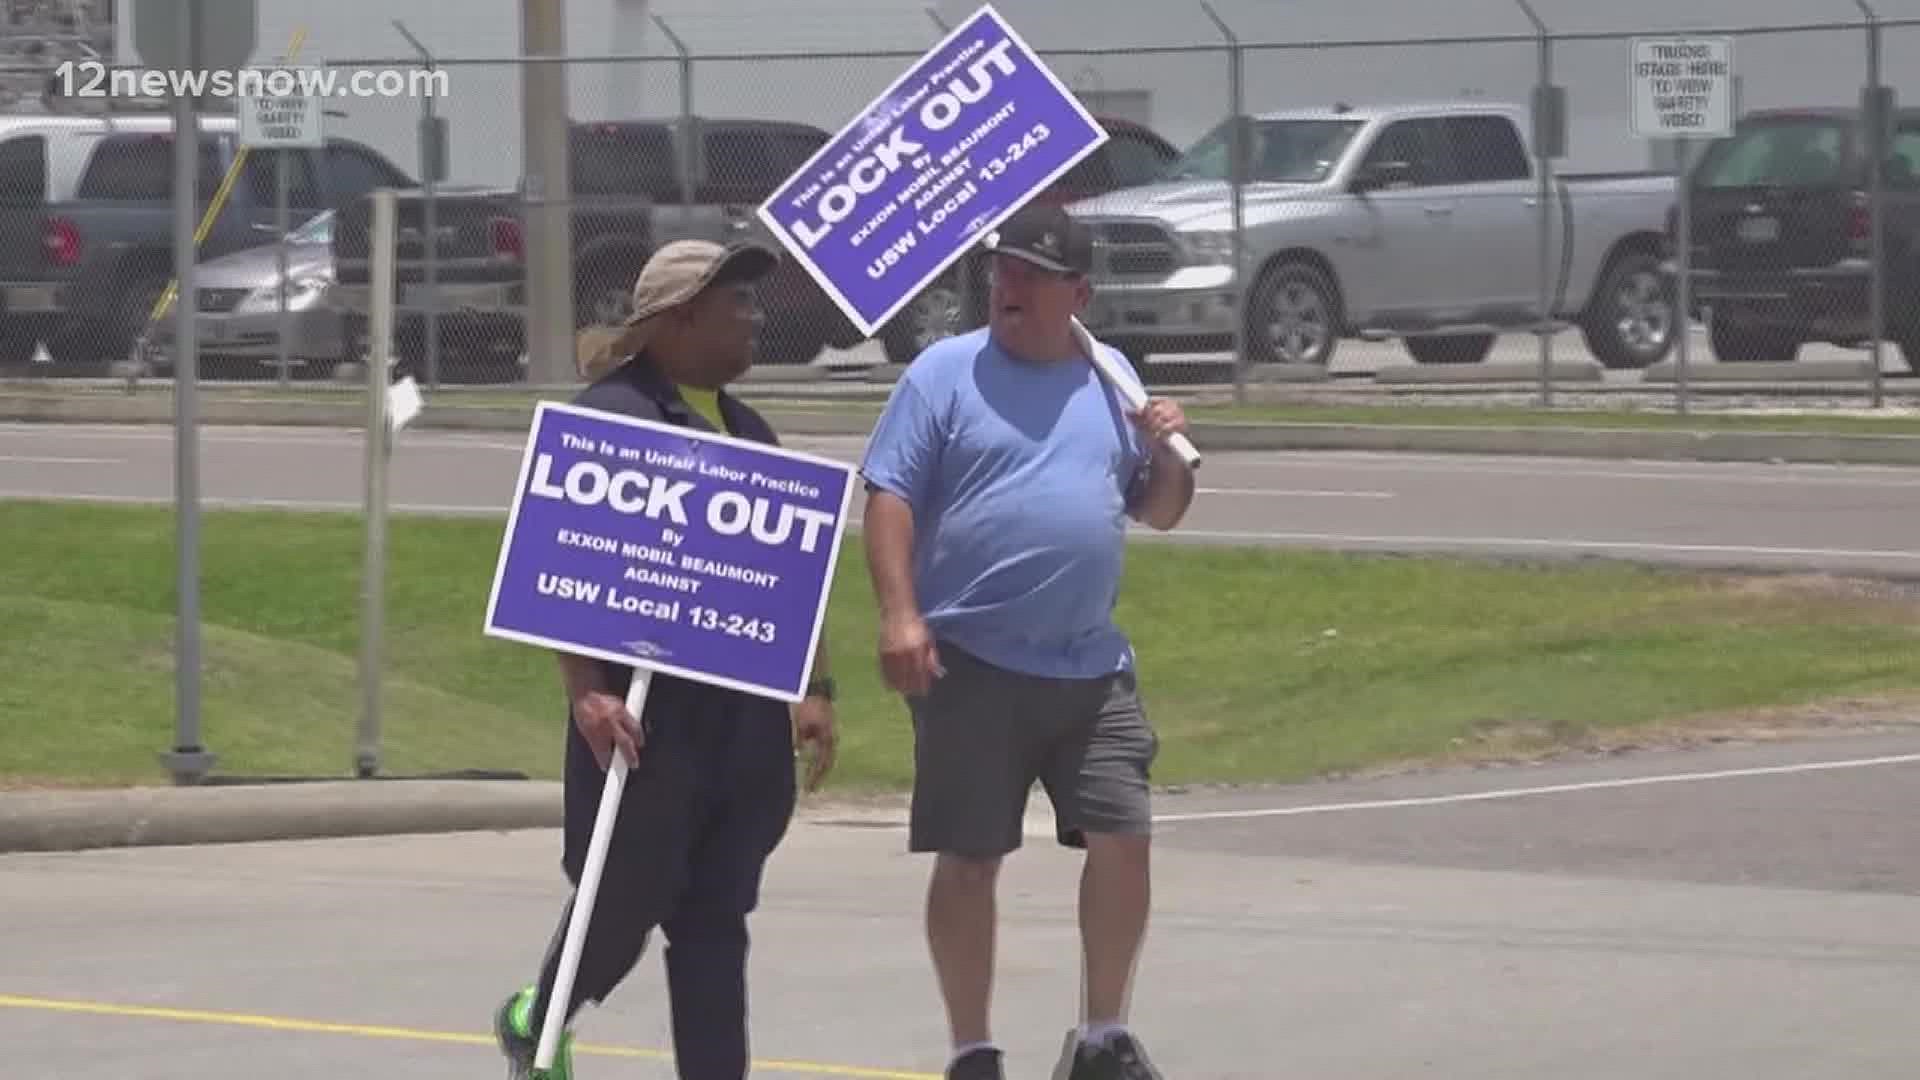 More than 600 employees have been locked out since May 2021.